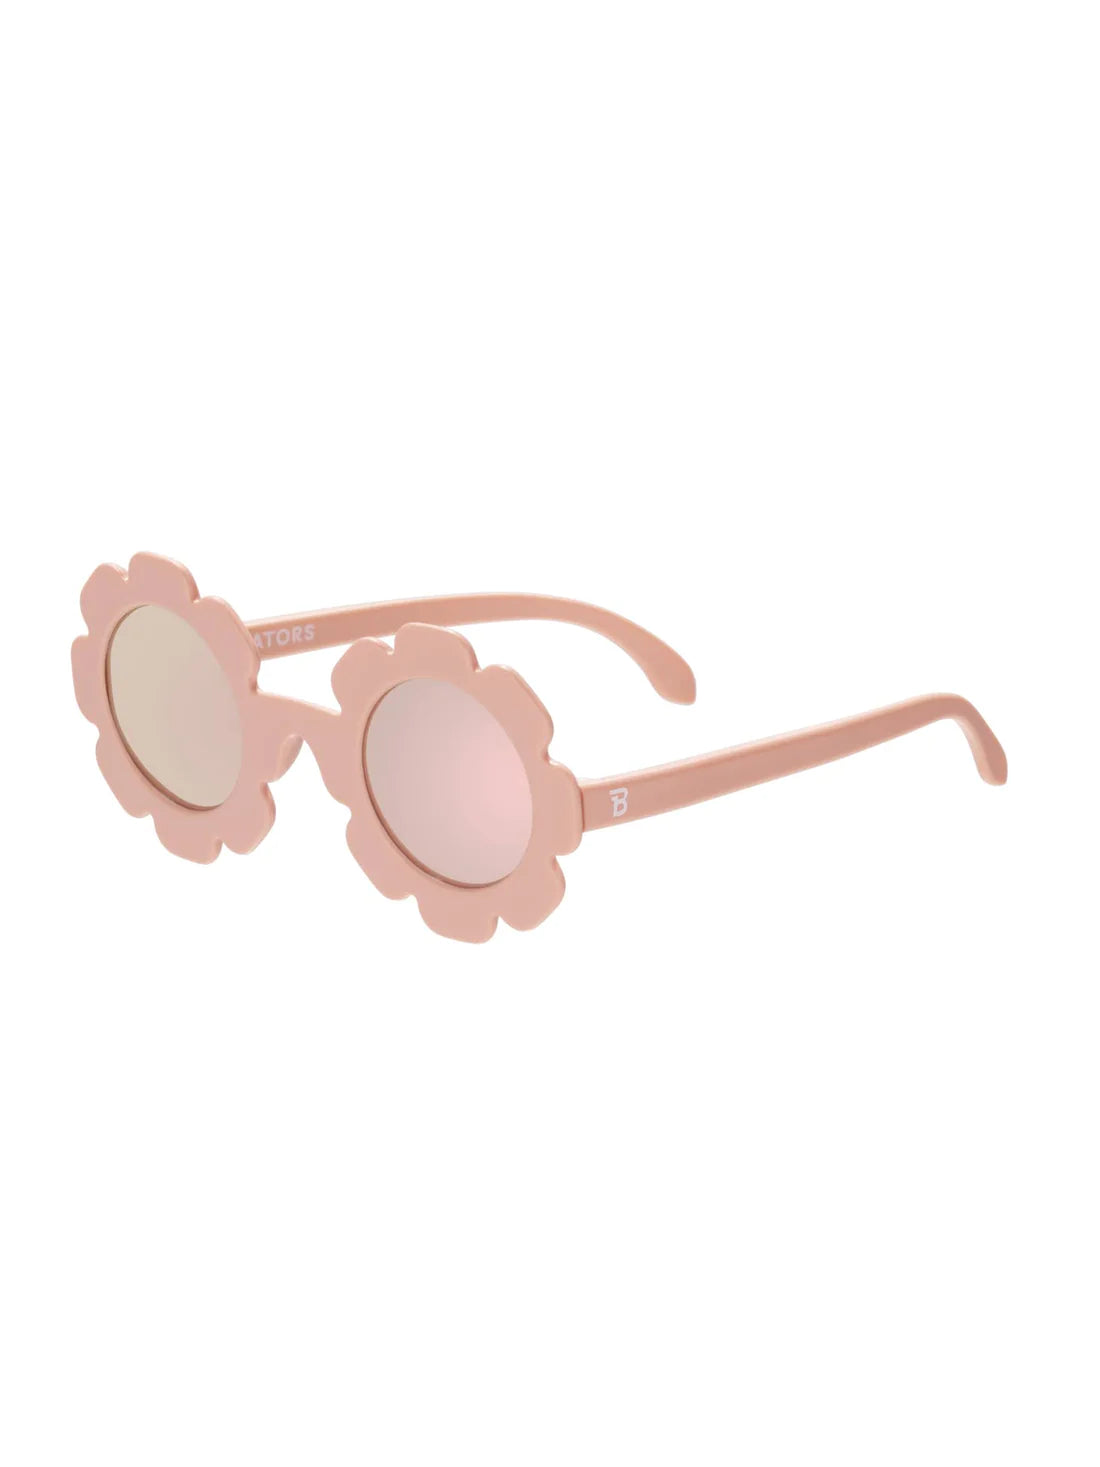 Flower Peachy Keen Polarized Sunglasses with Rose Gold Mirrored Len